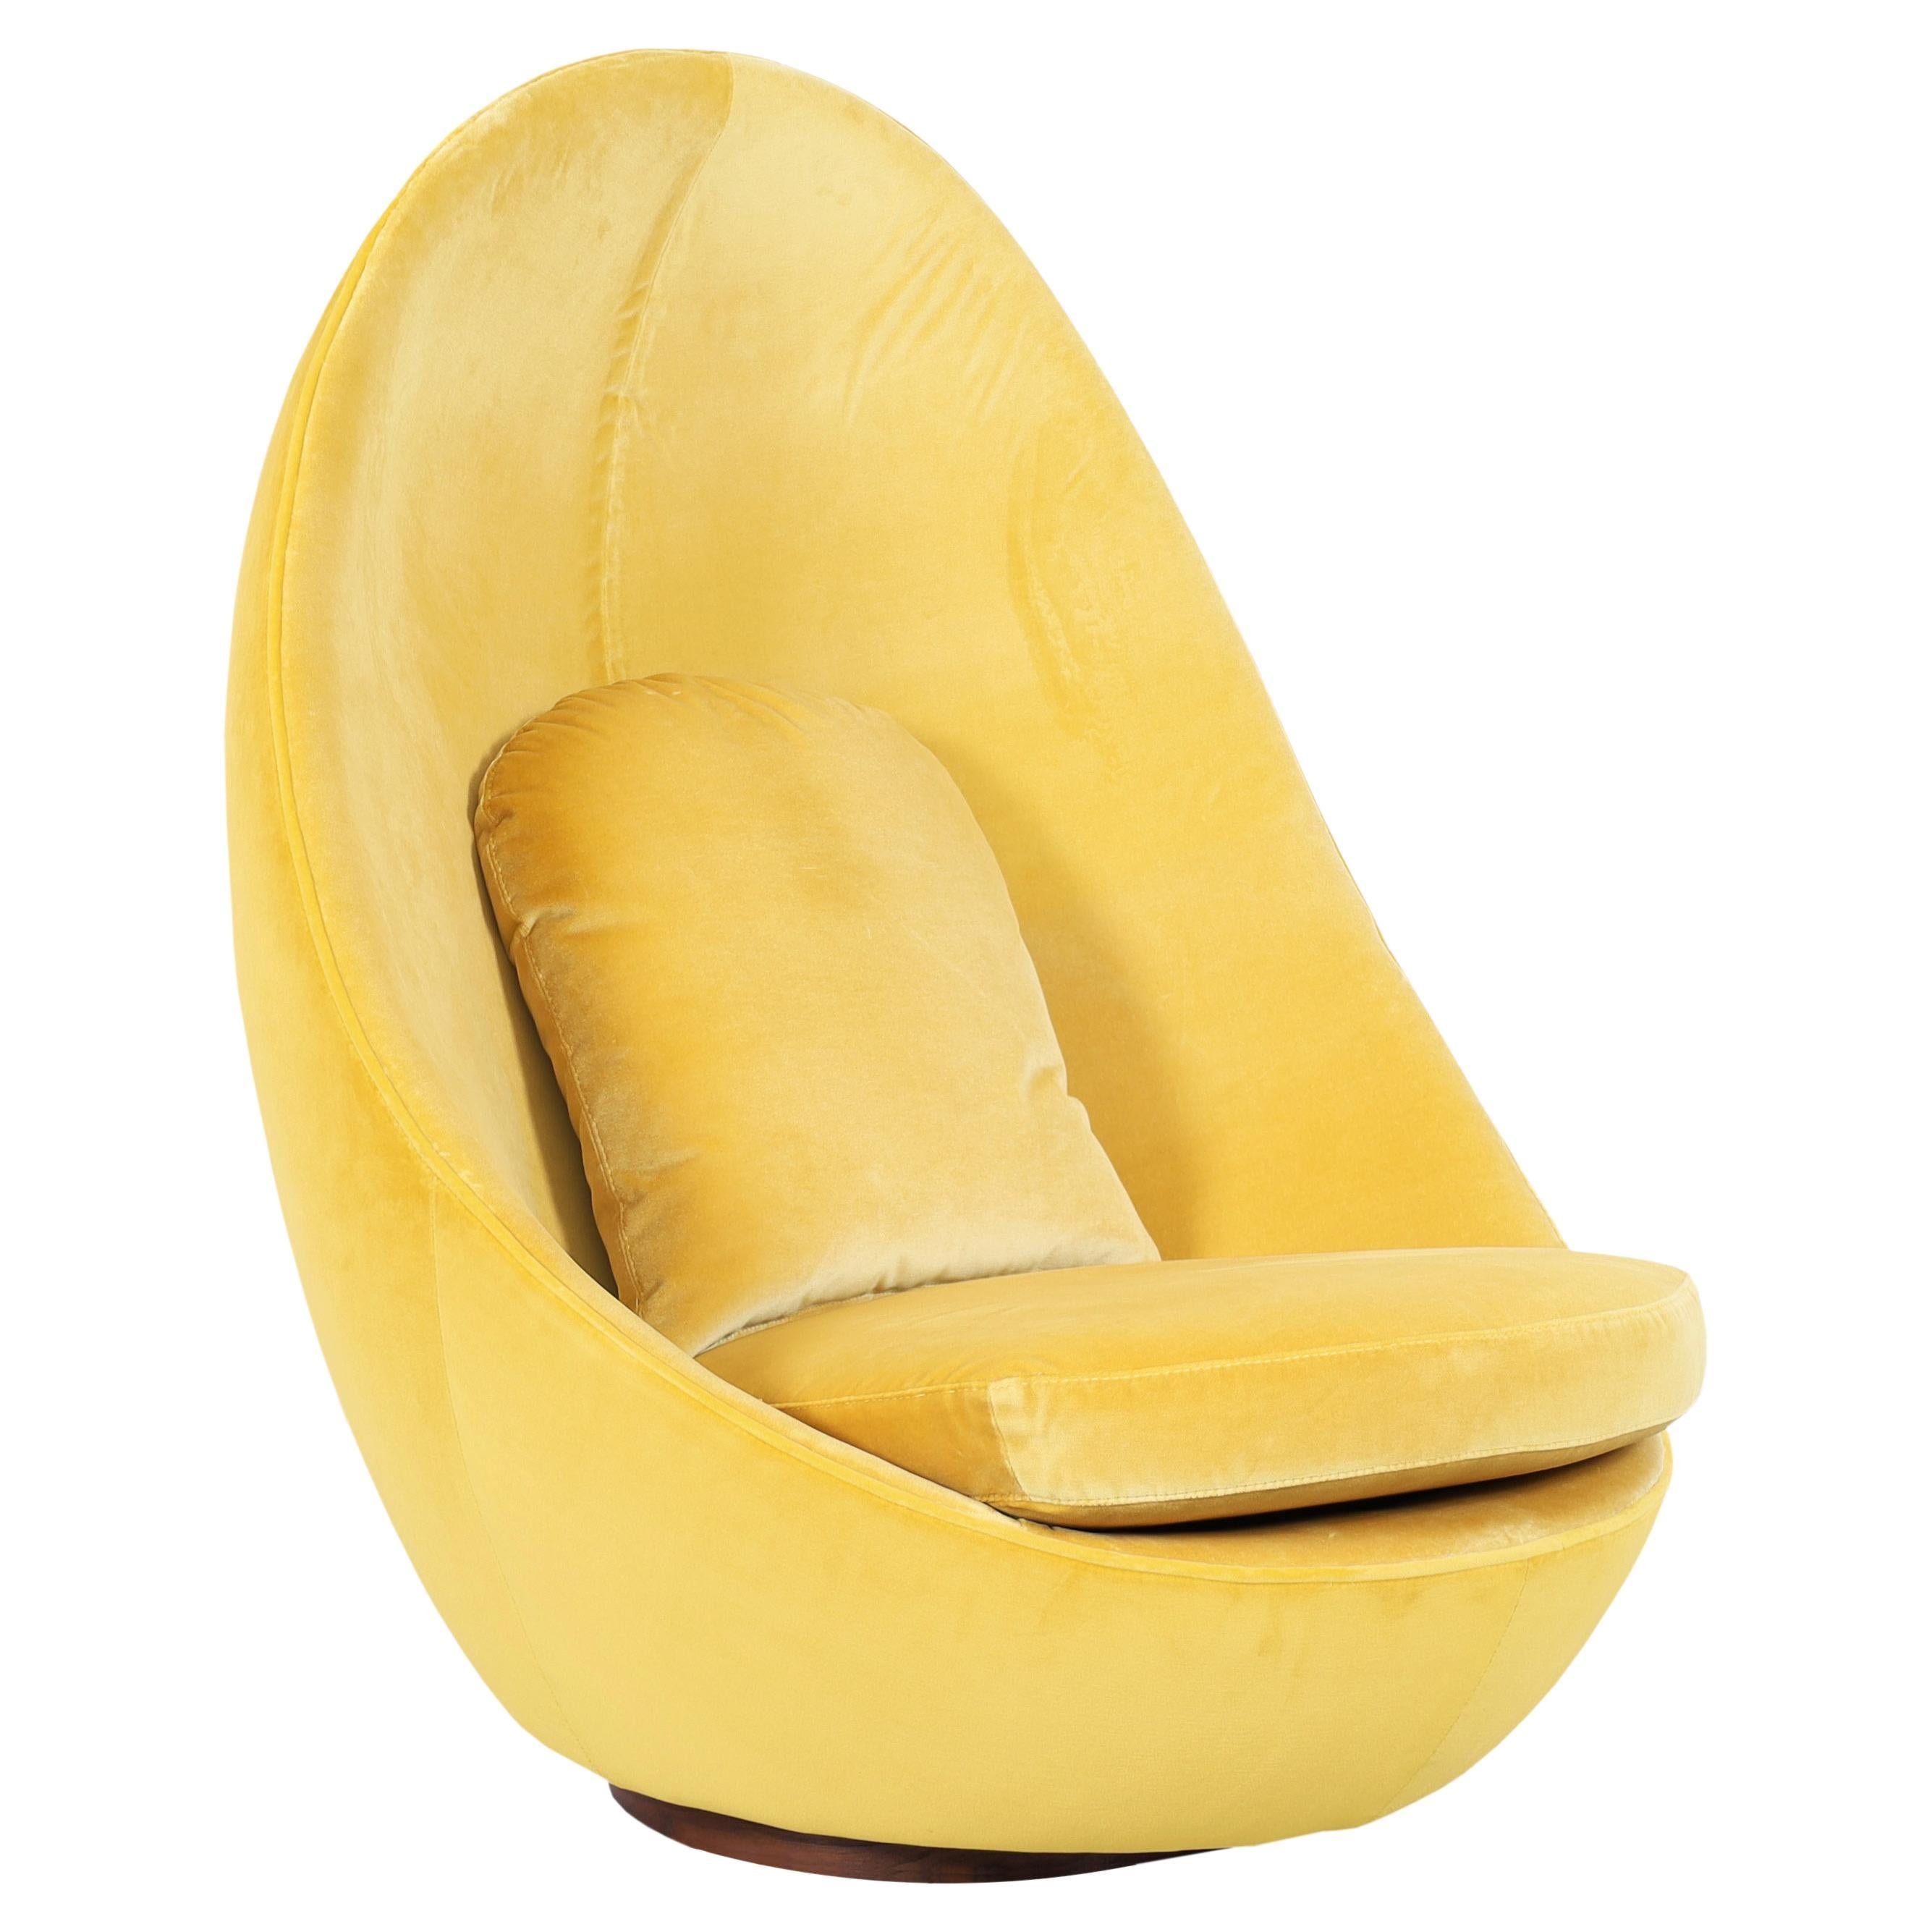 Vintage "Egg" Swivel Lounge Chair by Milo Baughman for Thayer Coggin